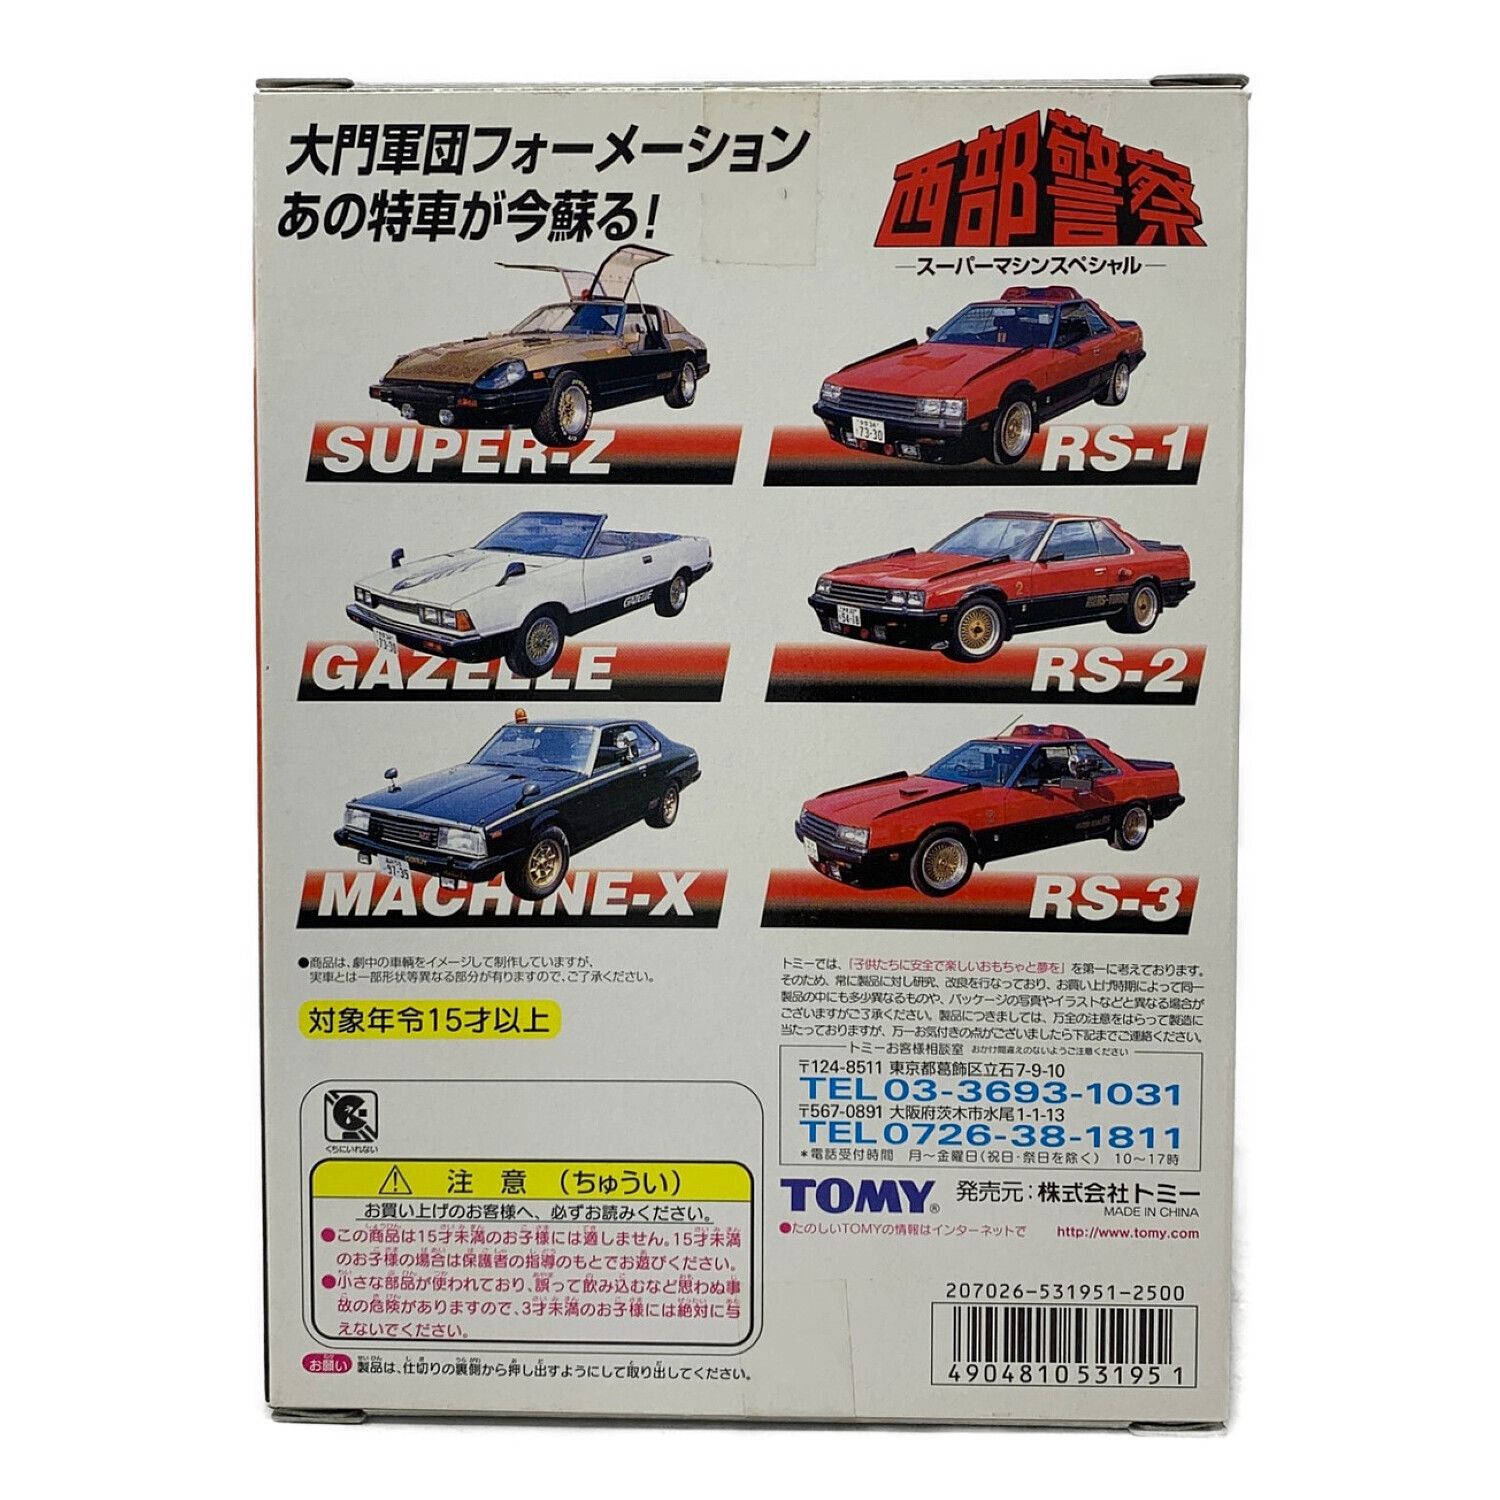 TOMY (トミー) トミカ 西部警察スーパーマシンスペシャル｜トレファク 